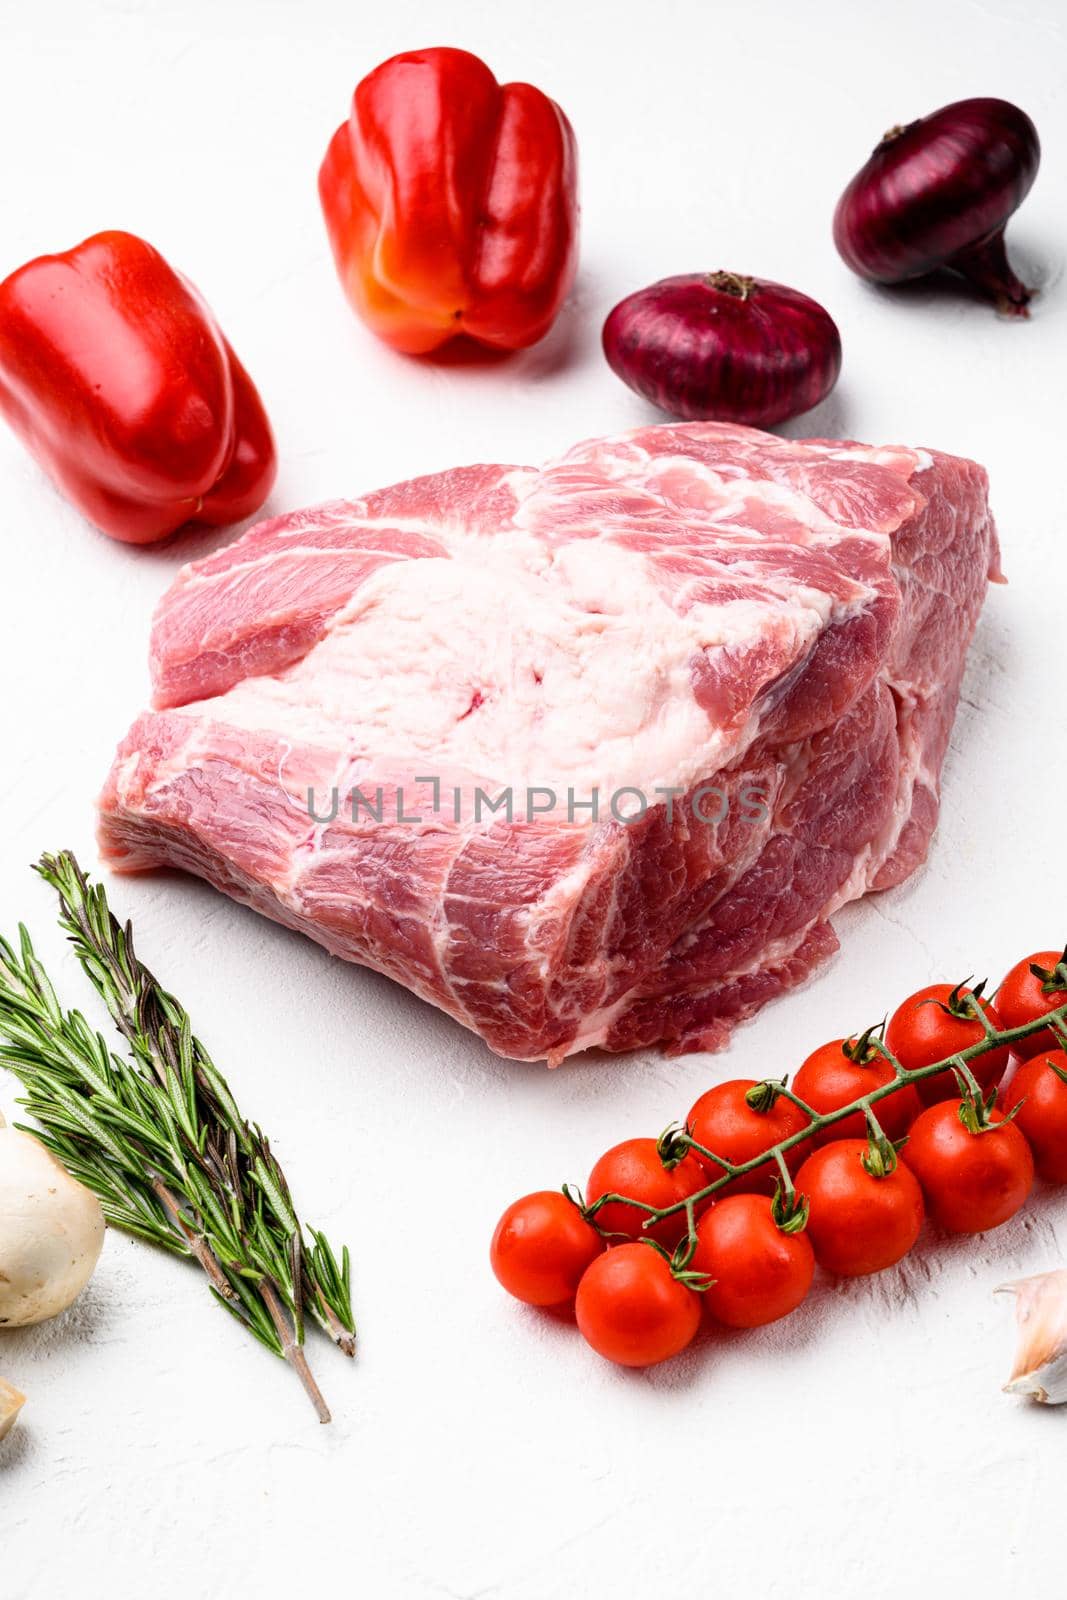 Pork meat raw neck set, with ingredients and herbs, on white stone table background